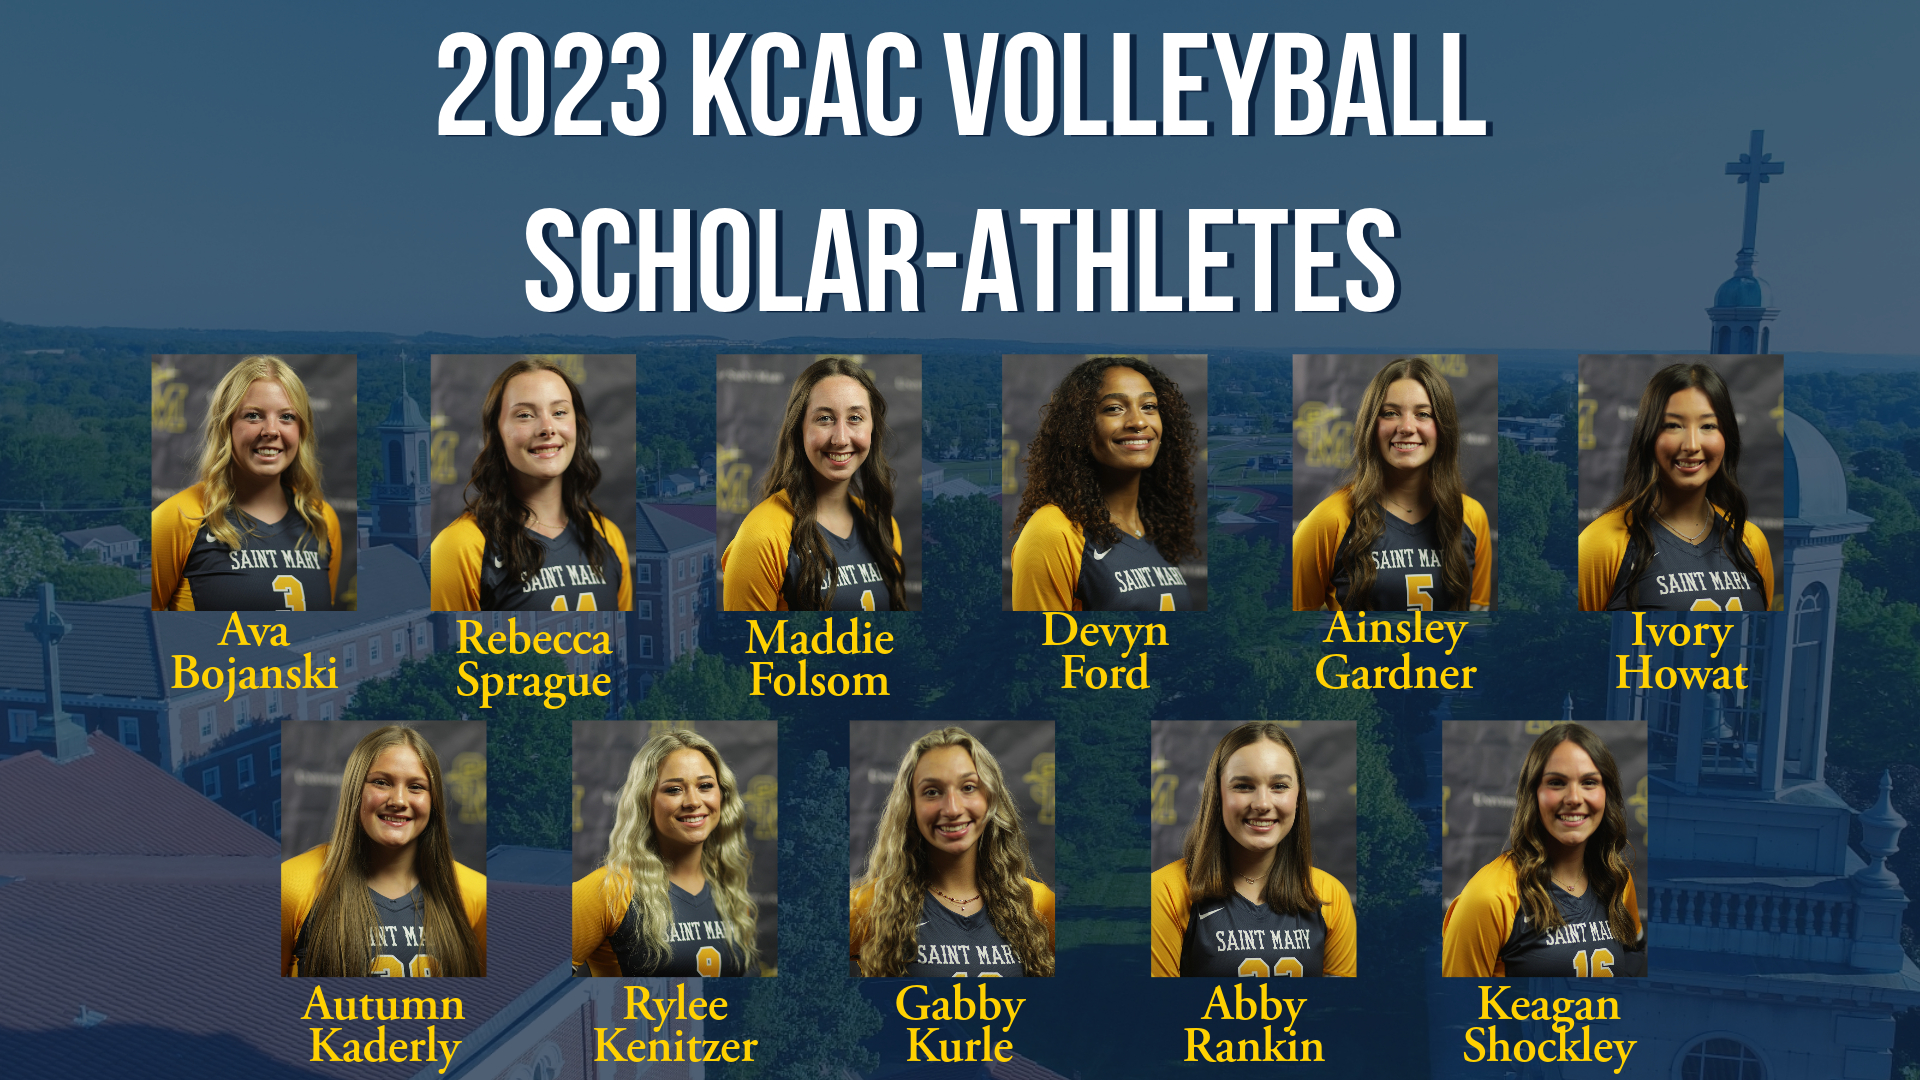 11 Volleyball Players Named 2023 KCAC Scholar-Athletes